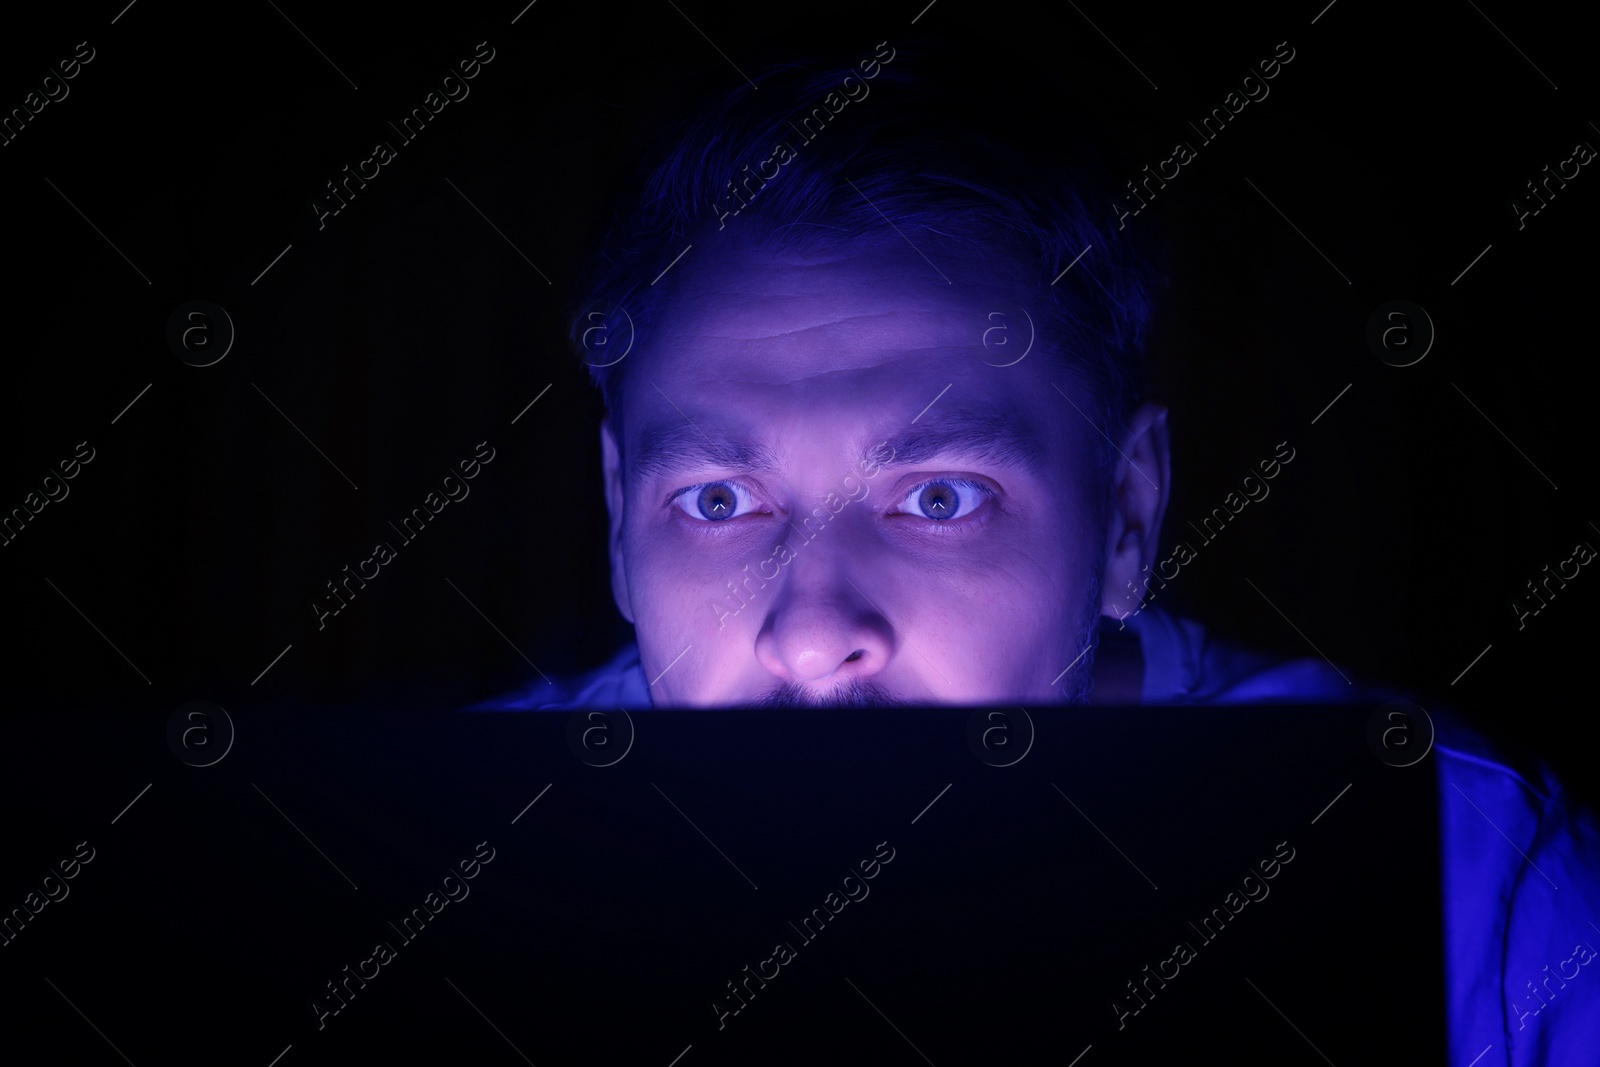 Image of Internet addiction. Man with device at night. Toned in blue